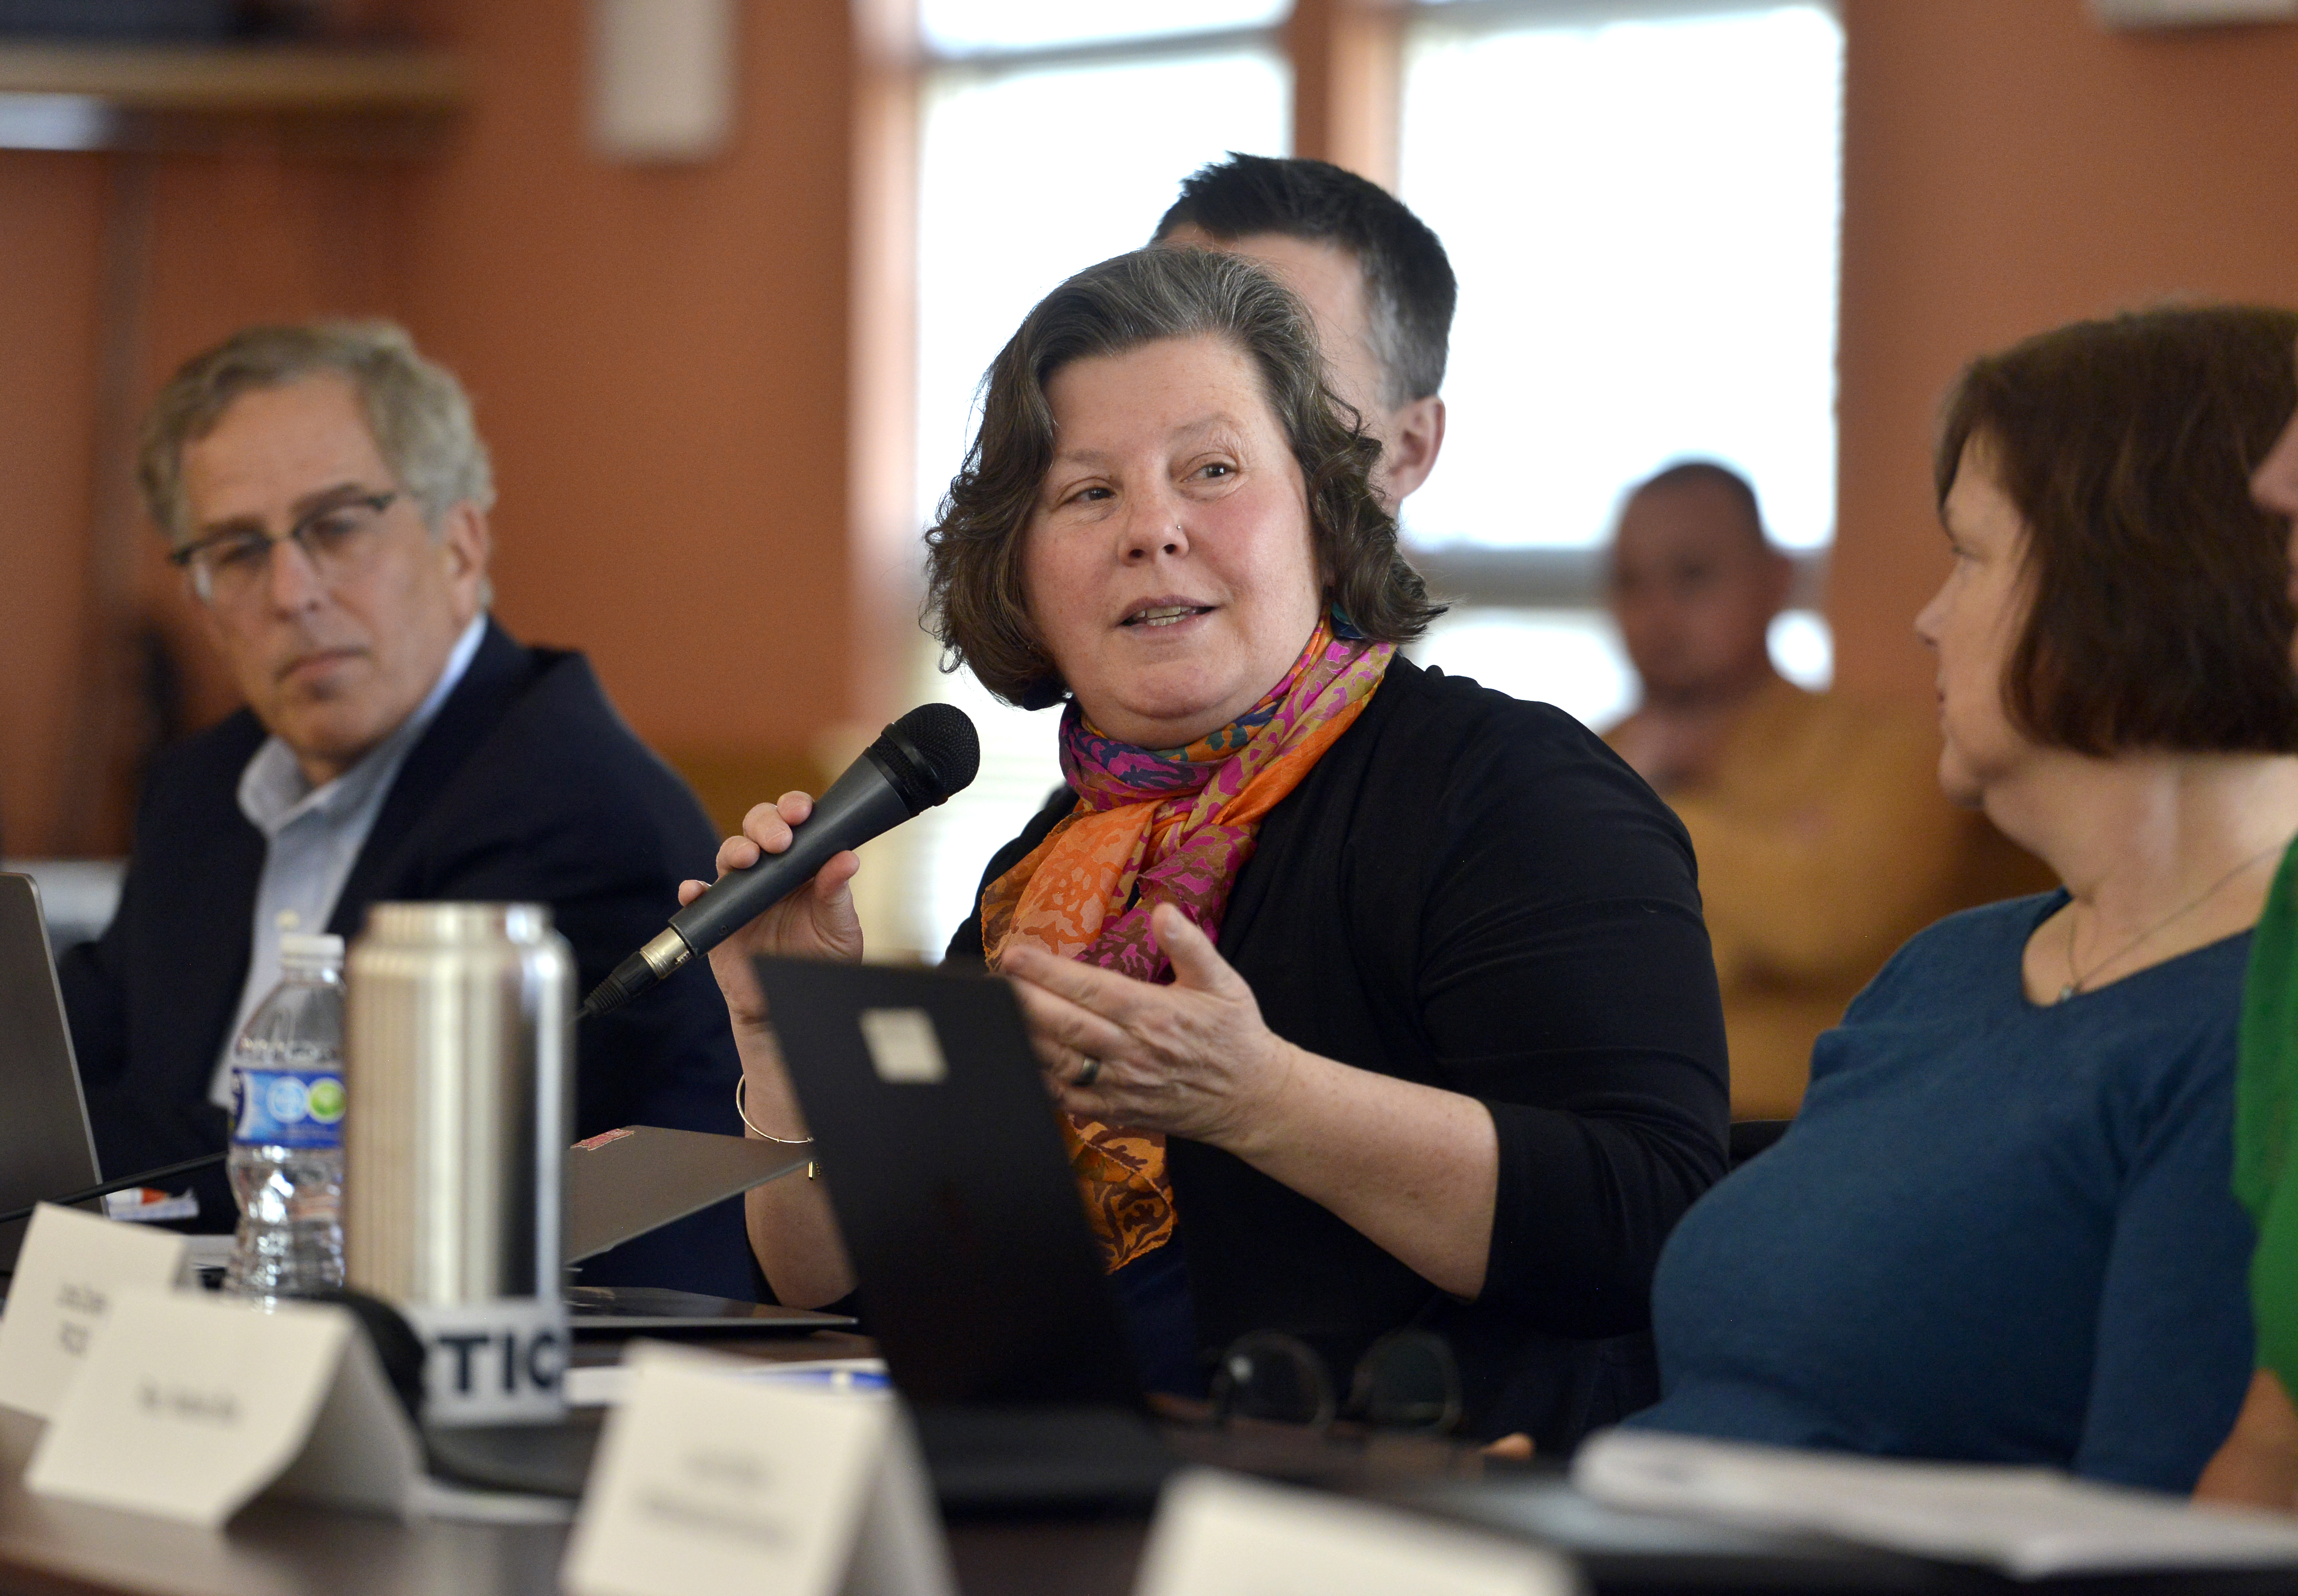 State Representative Joanne Comerford speaks during a meeting of the Western Massachusetts Passenger Rail Commission at the Northampton Senior Center.  (Don Treeger / The Republican)  3/21/2023